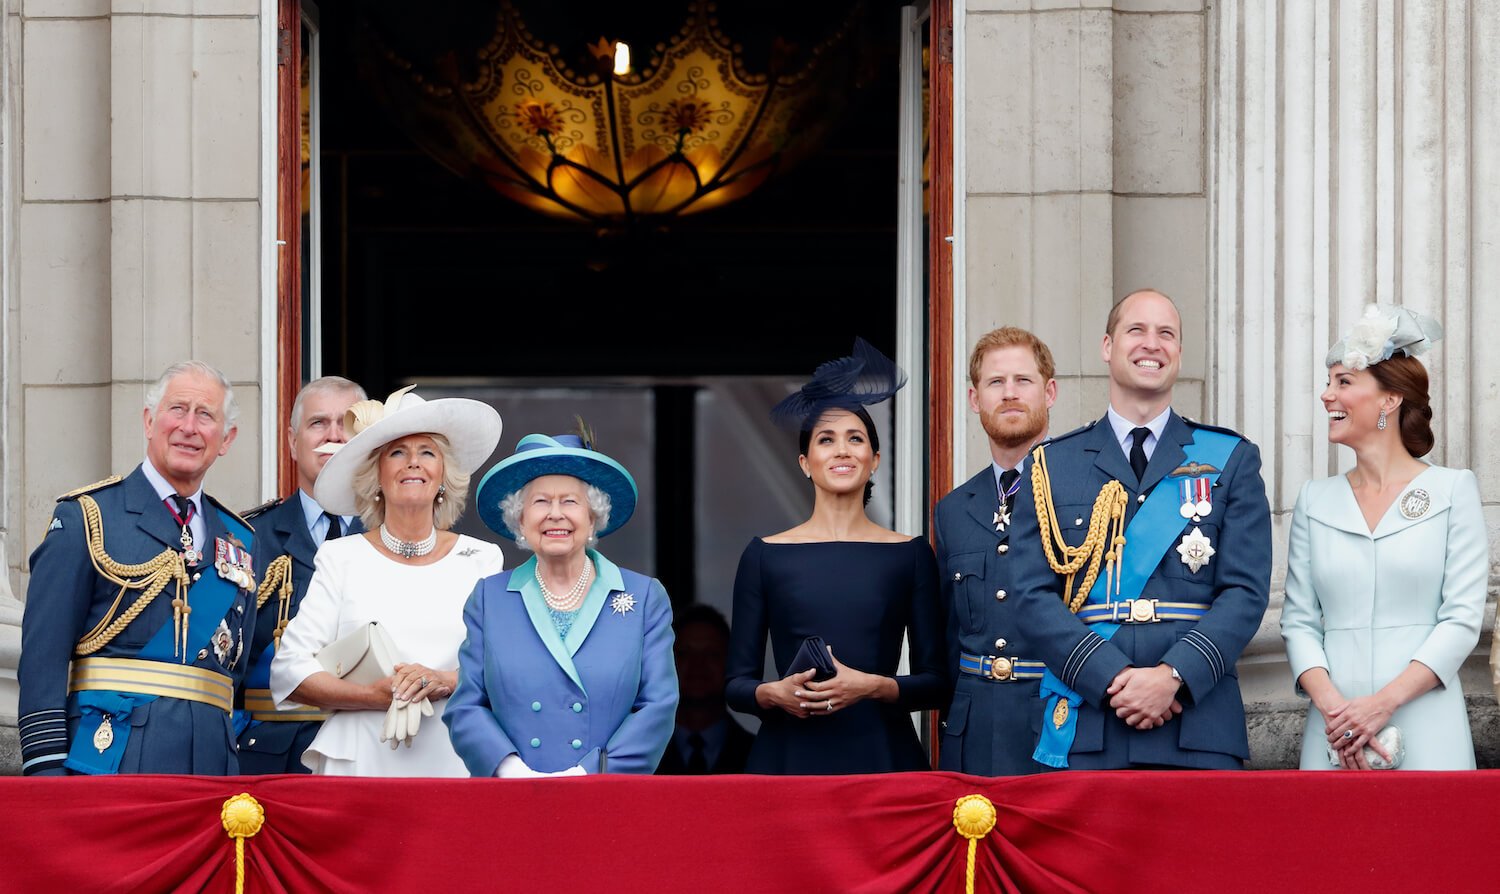 Prince Harry ‘Still Longs for Association’ With Royal Family Despite His Claims, Expert Says